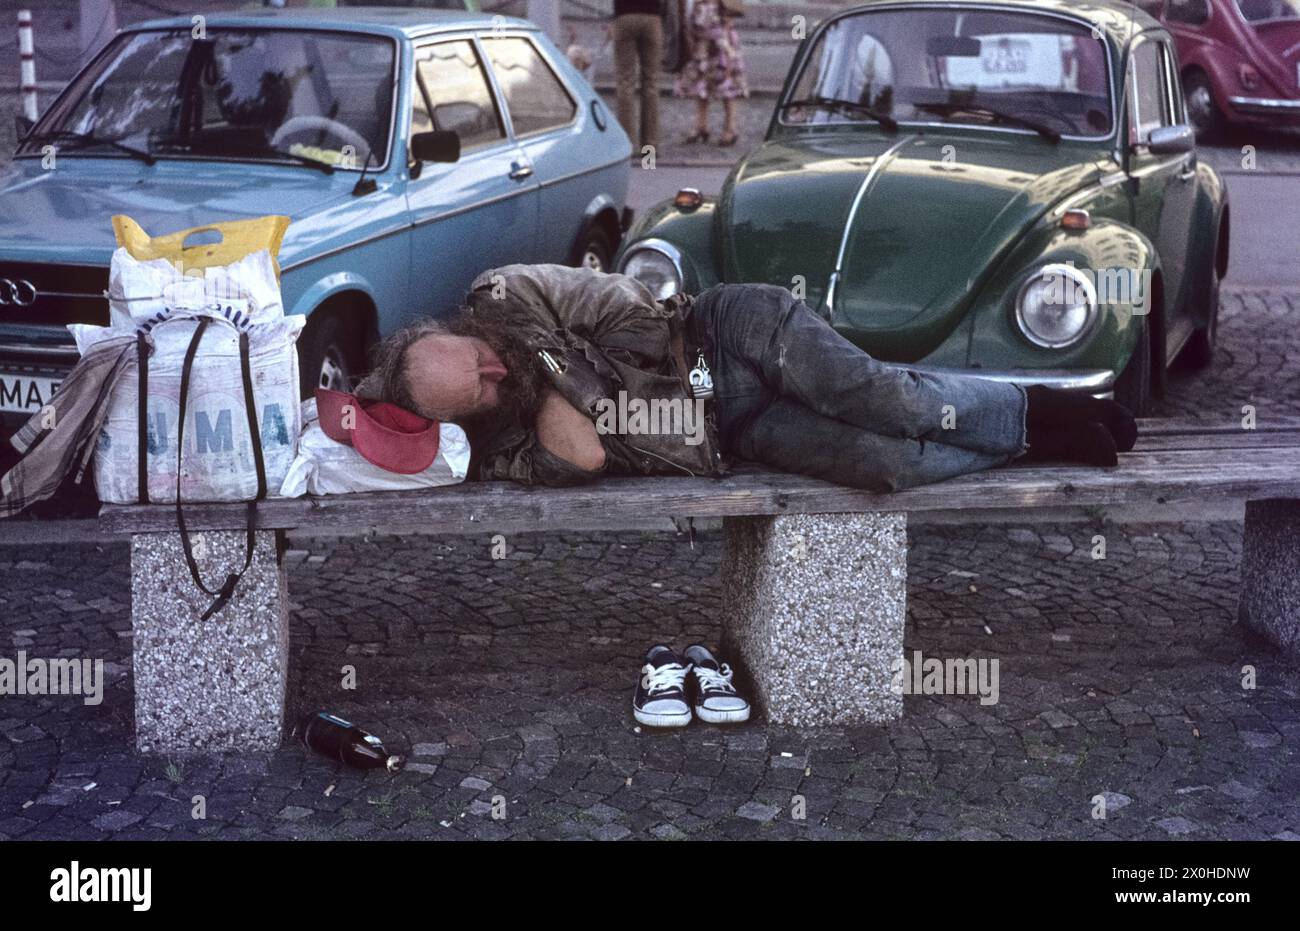 A homeless man sleeps on a bench in front of the Munich University in Schwabing. he has put his shoes under the bench. Next to him his things are in simple bags, on the floor is a bottle. Behind him are some cars, a turquoise Audi and a dark green VW Beetle. [automated translation] Stock Photo